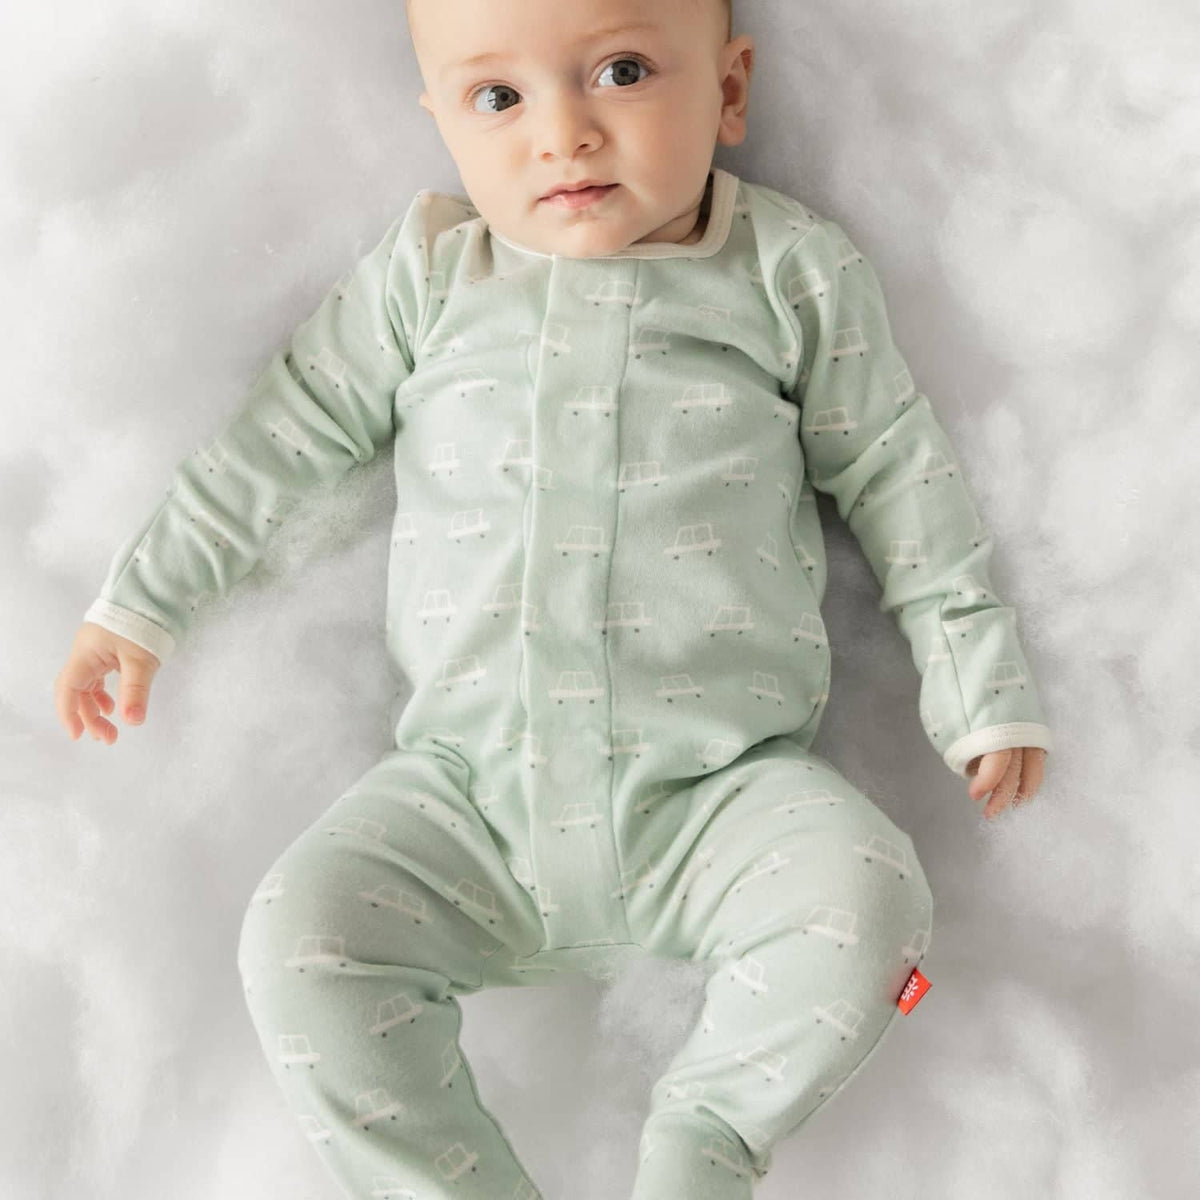 beep beep time for sleep organic cotton magnetic footie